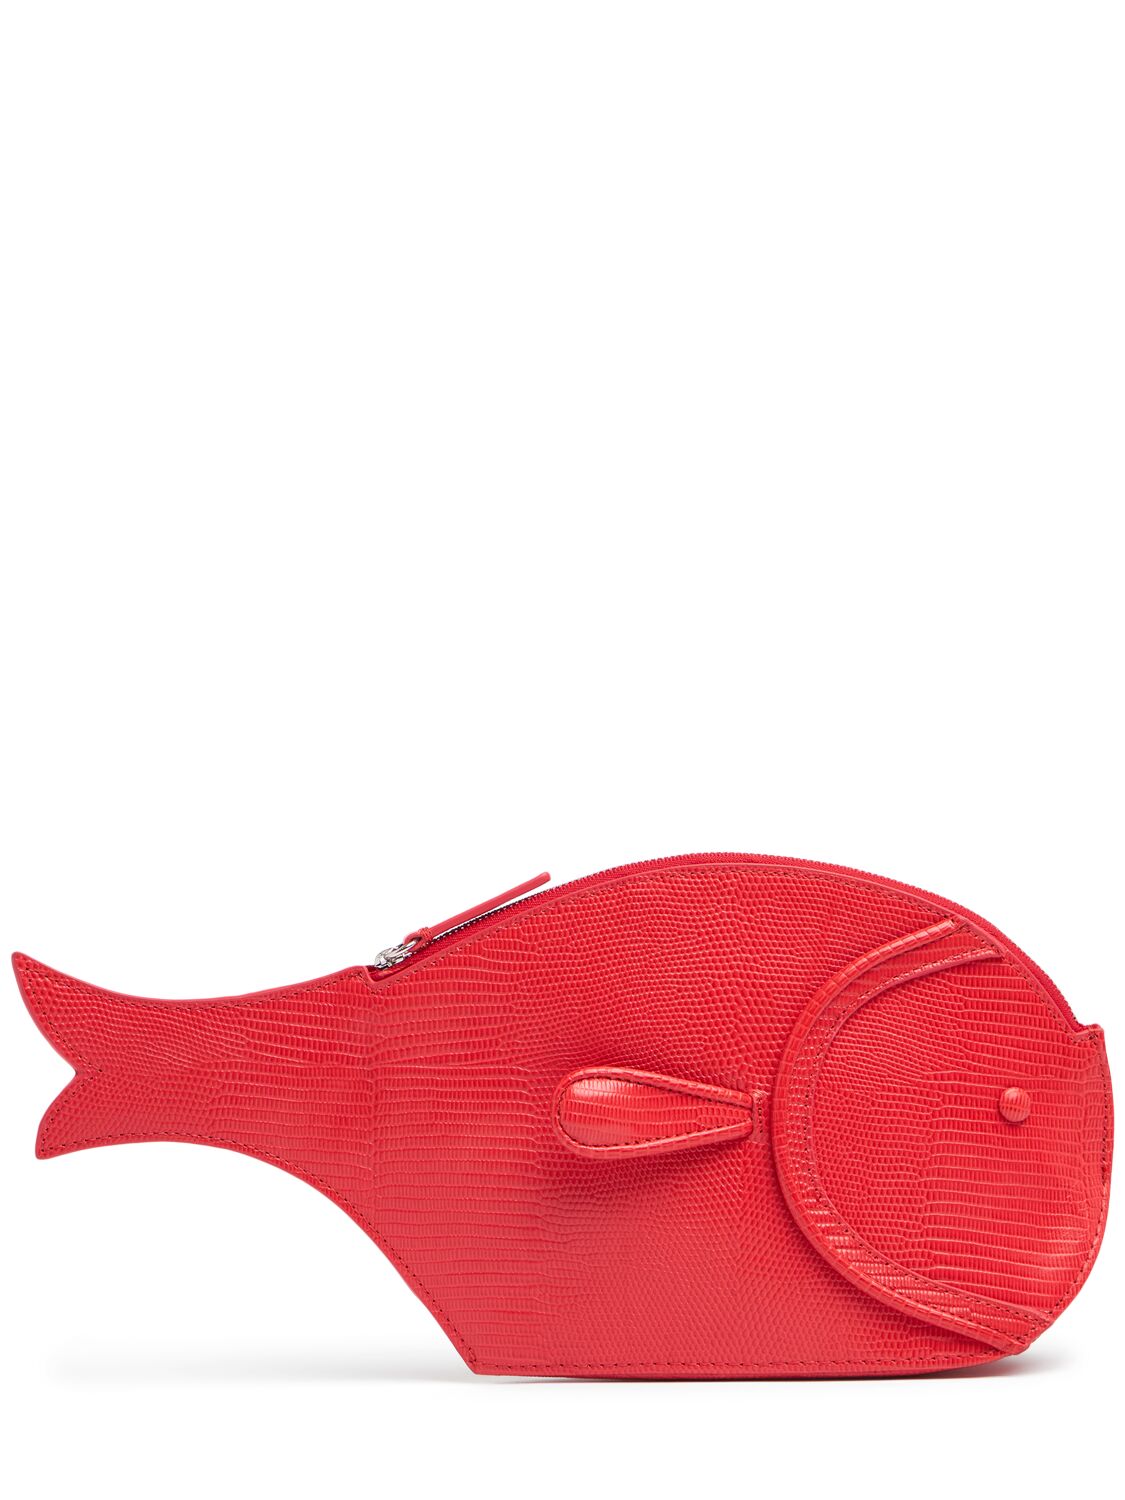 Pesce Embossed Leather Clutch